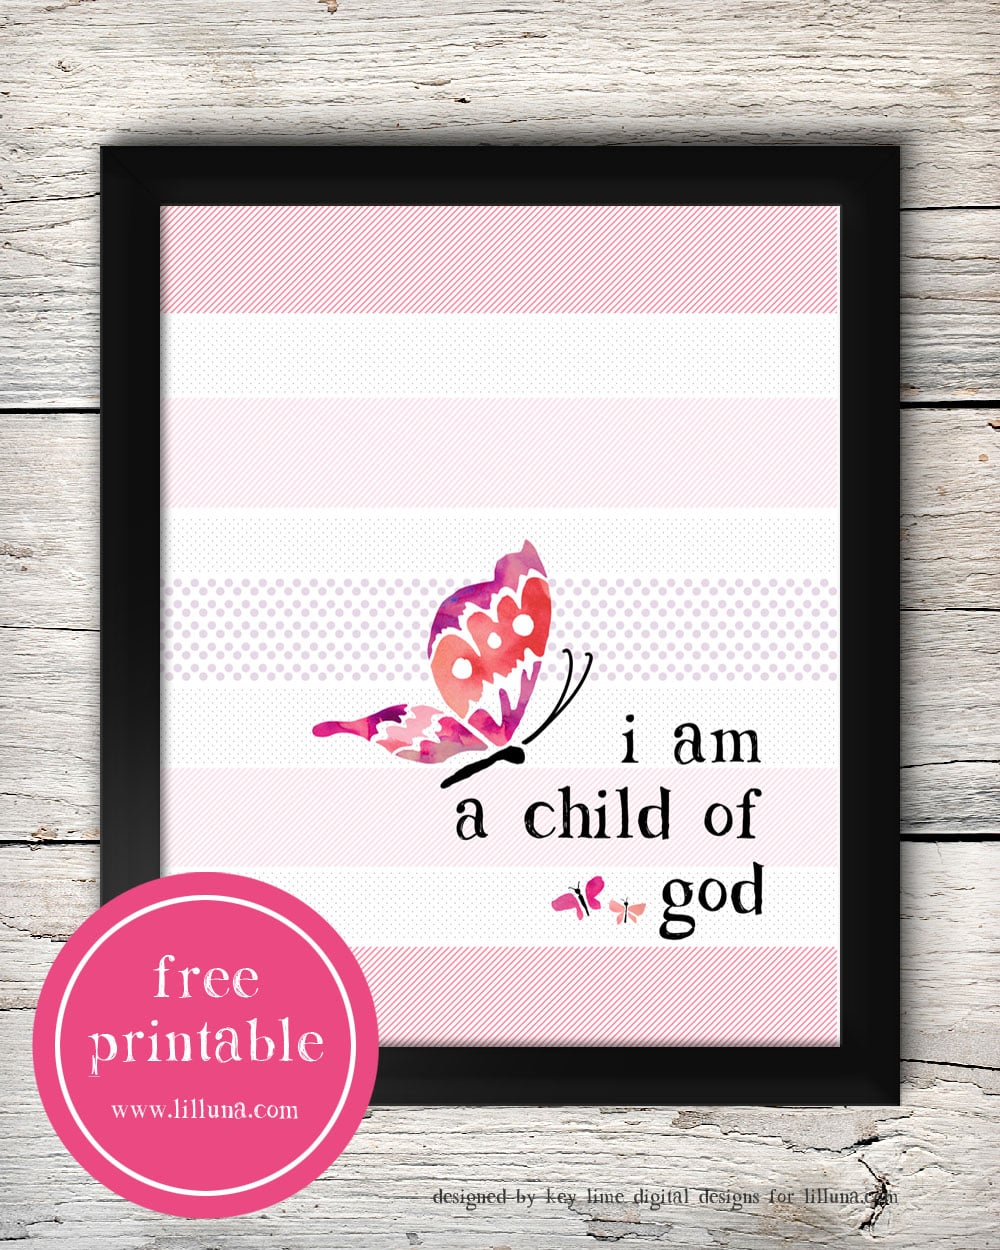 FREE I am a Child of God printable - just download, print and display!